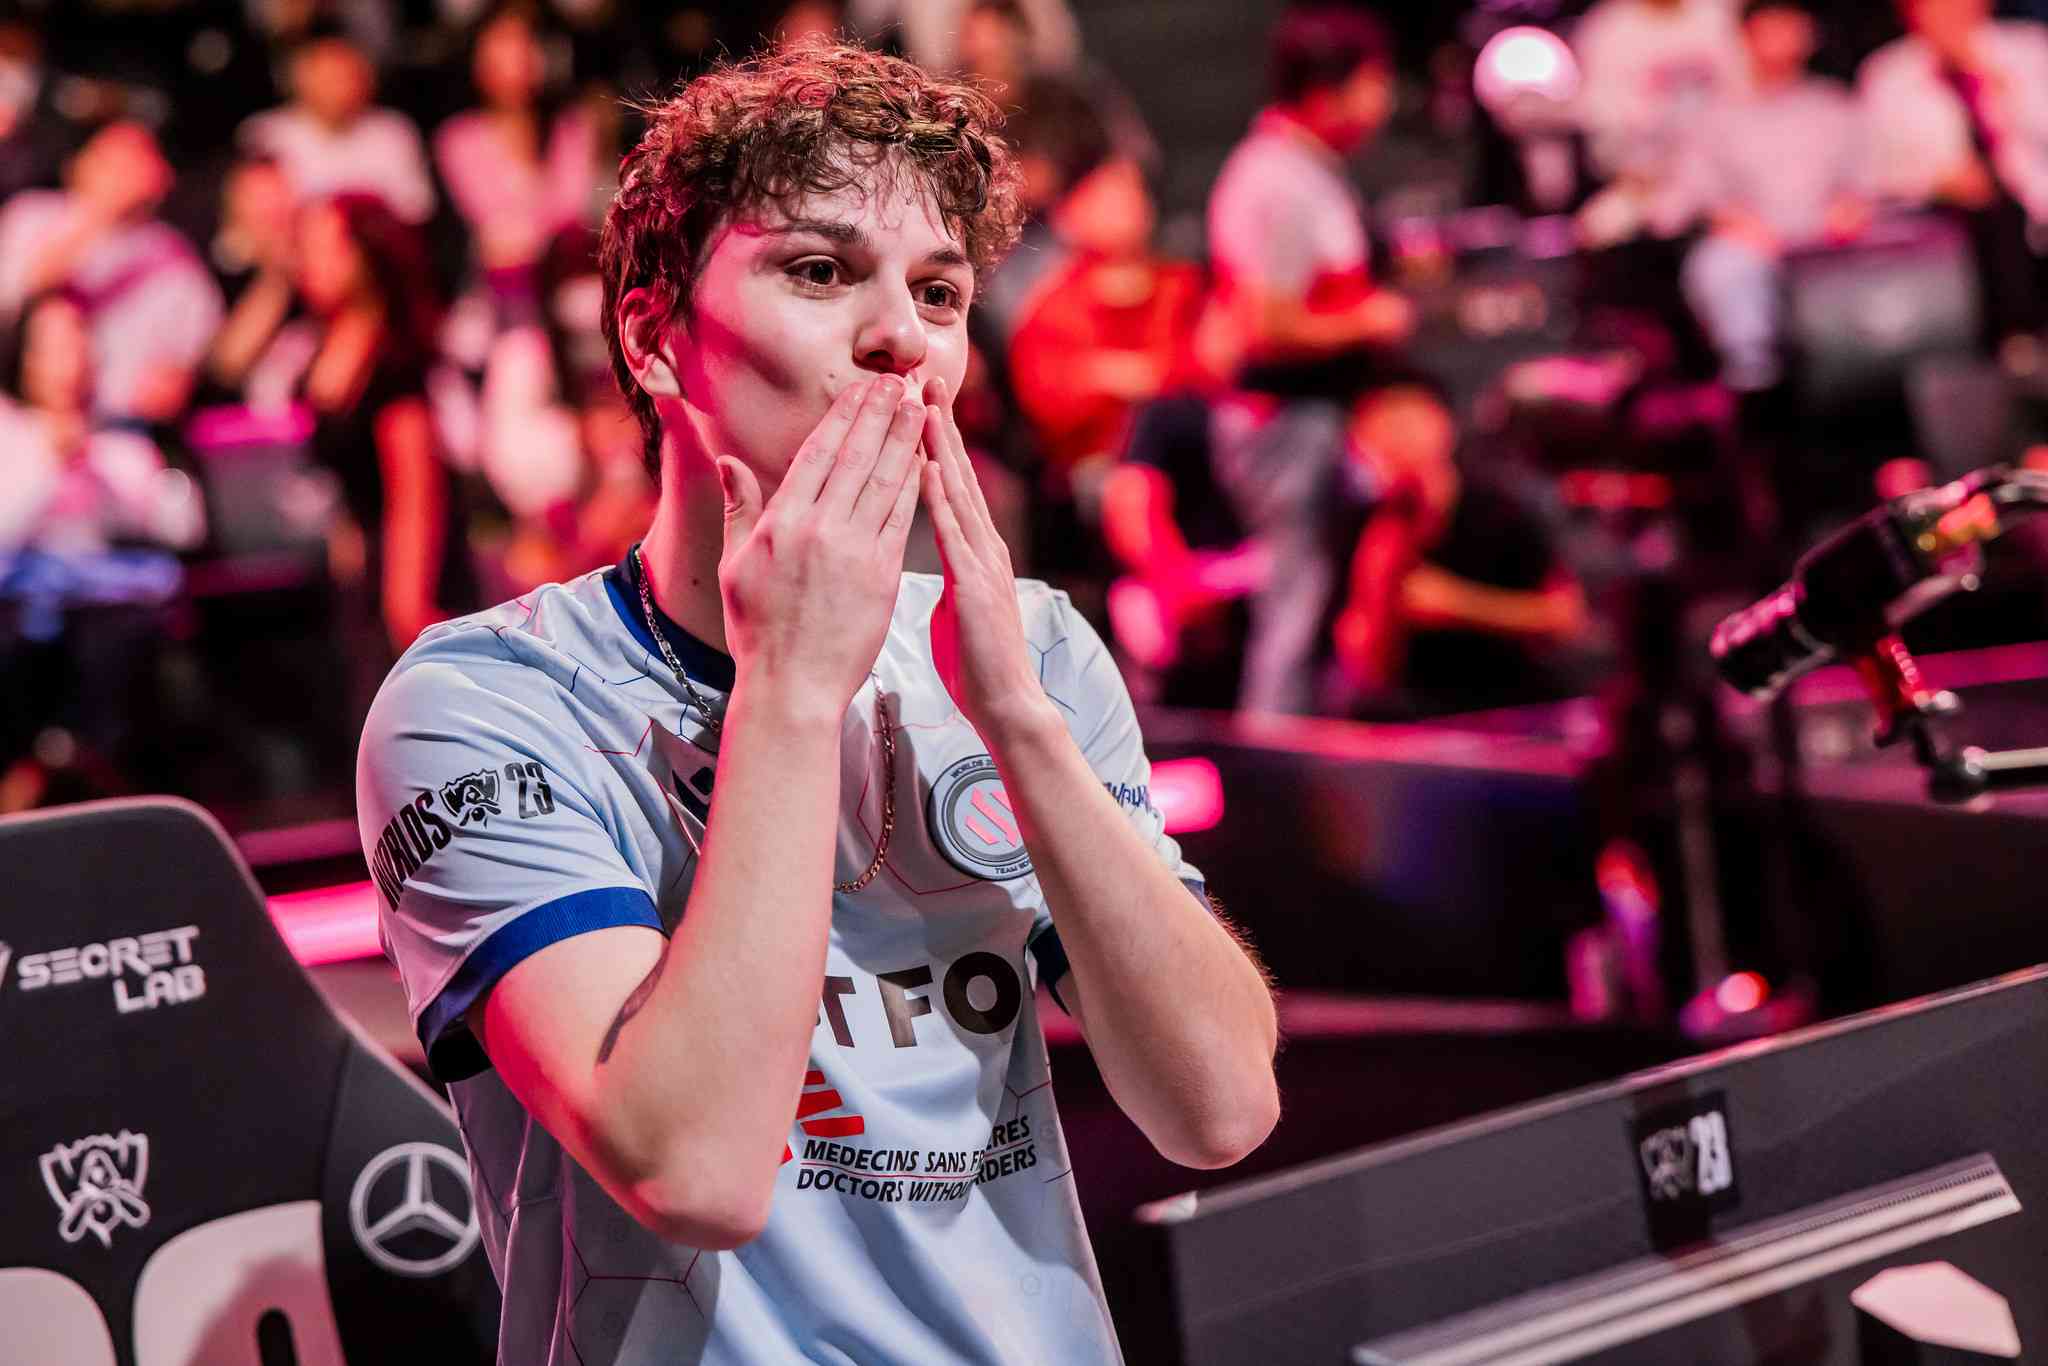 Adam "Adam" Maanane sends kisses to the crowd (Image Credits: Colin Young-Wolff/Riot Games)